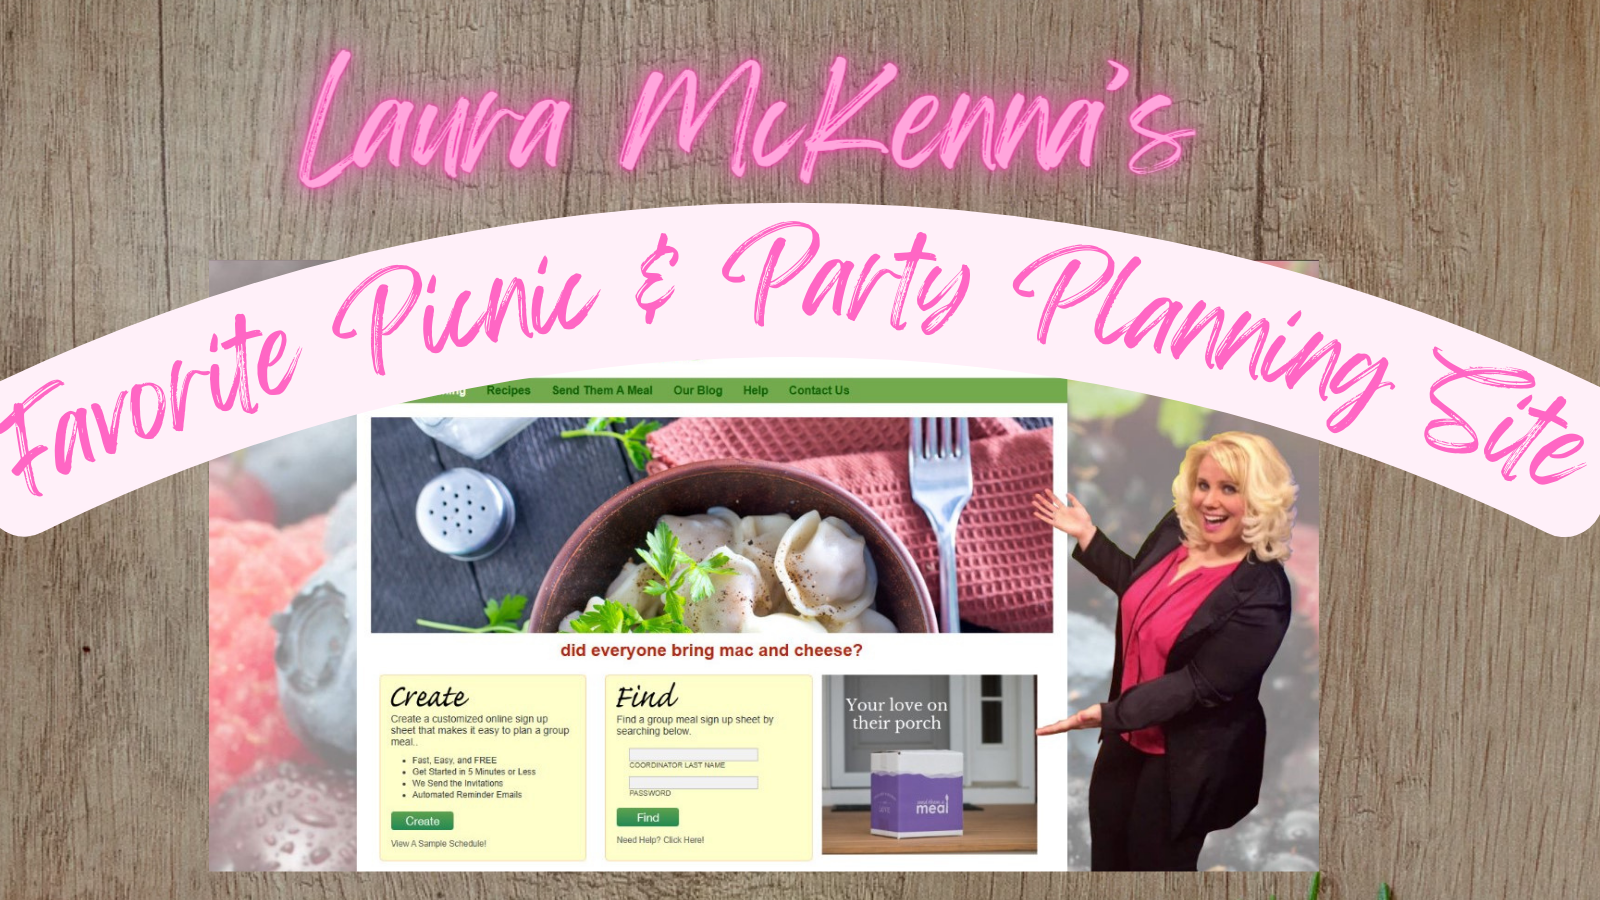 Laura McKenna’s Favorite Picnic & Party Planning Site